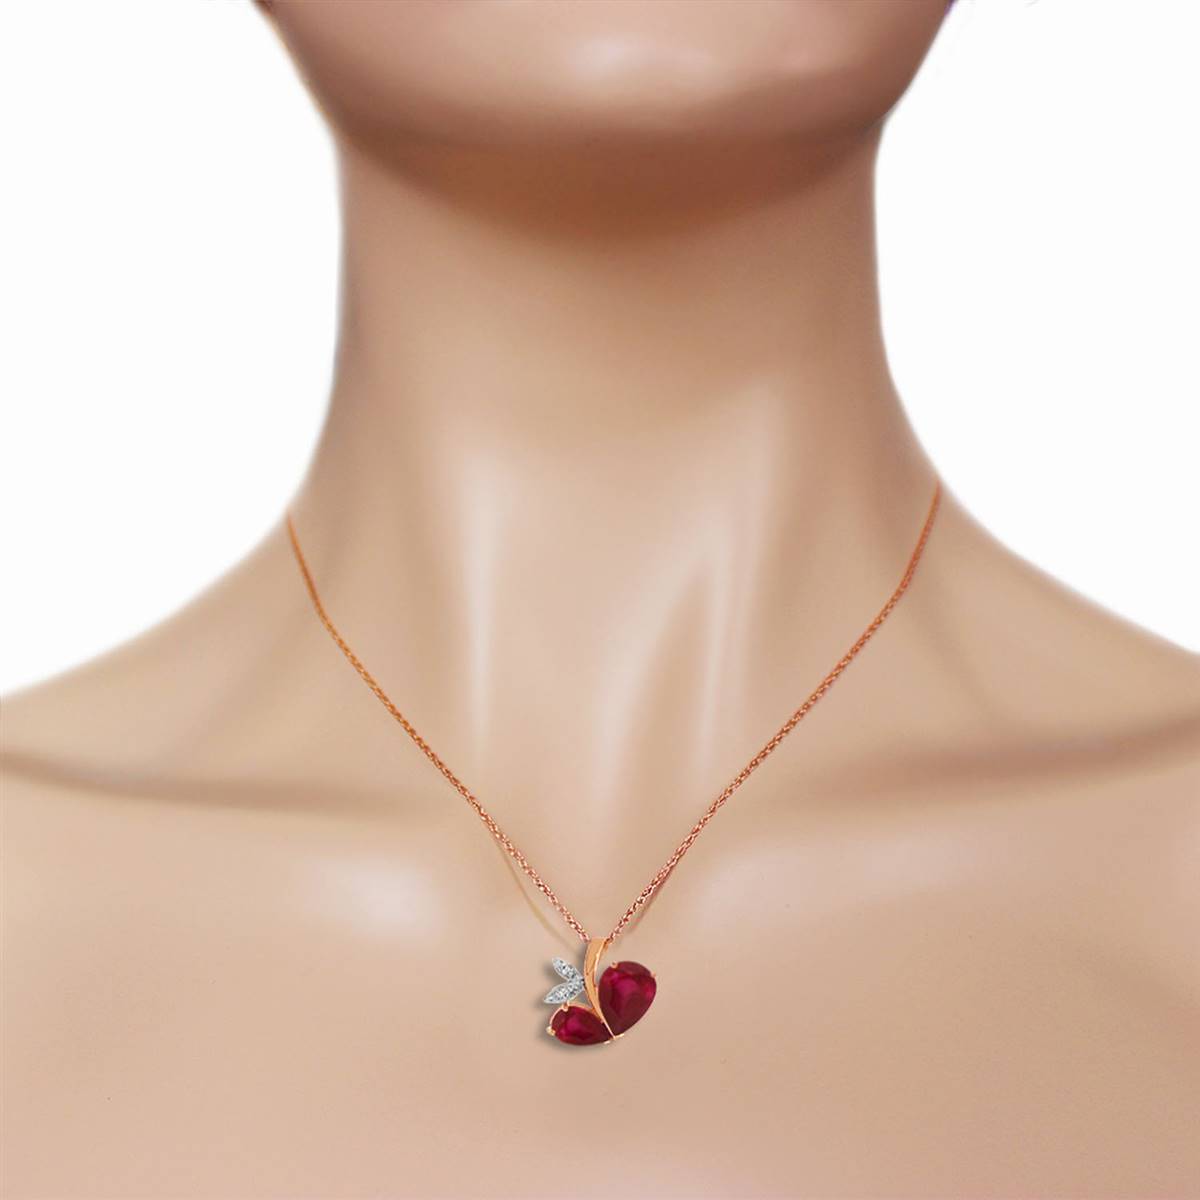 14K Solid Rose Gold Modern Heart Necklace w/ Natural Diamond & Rubies